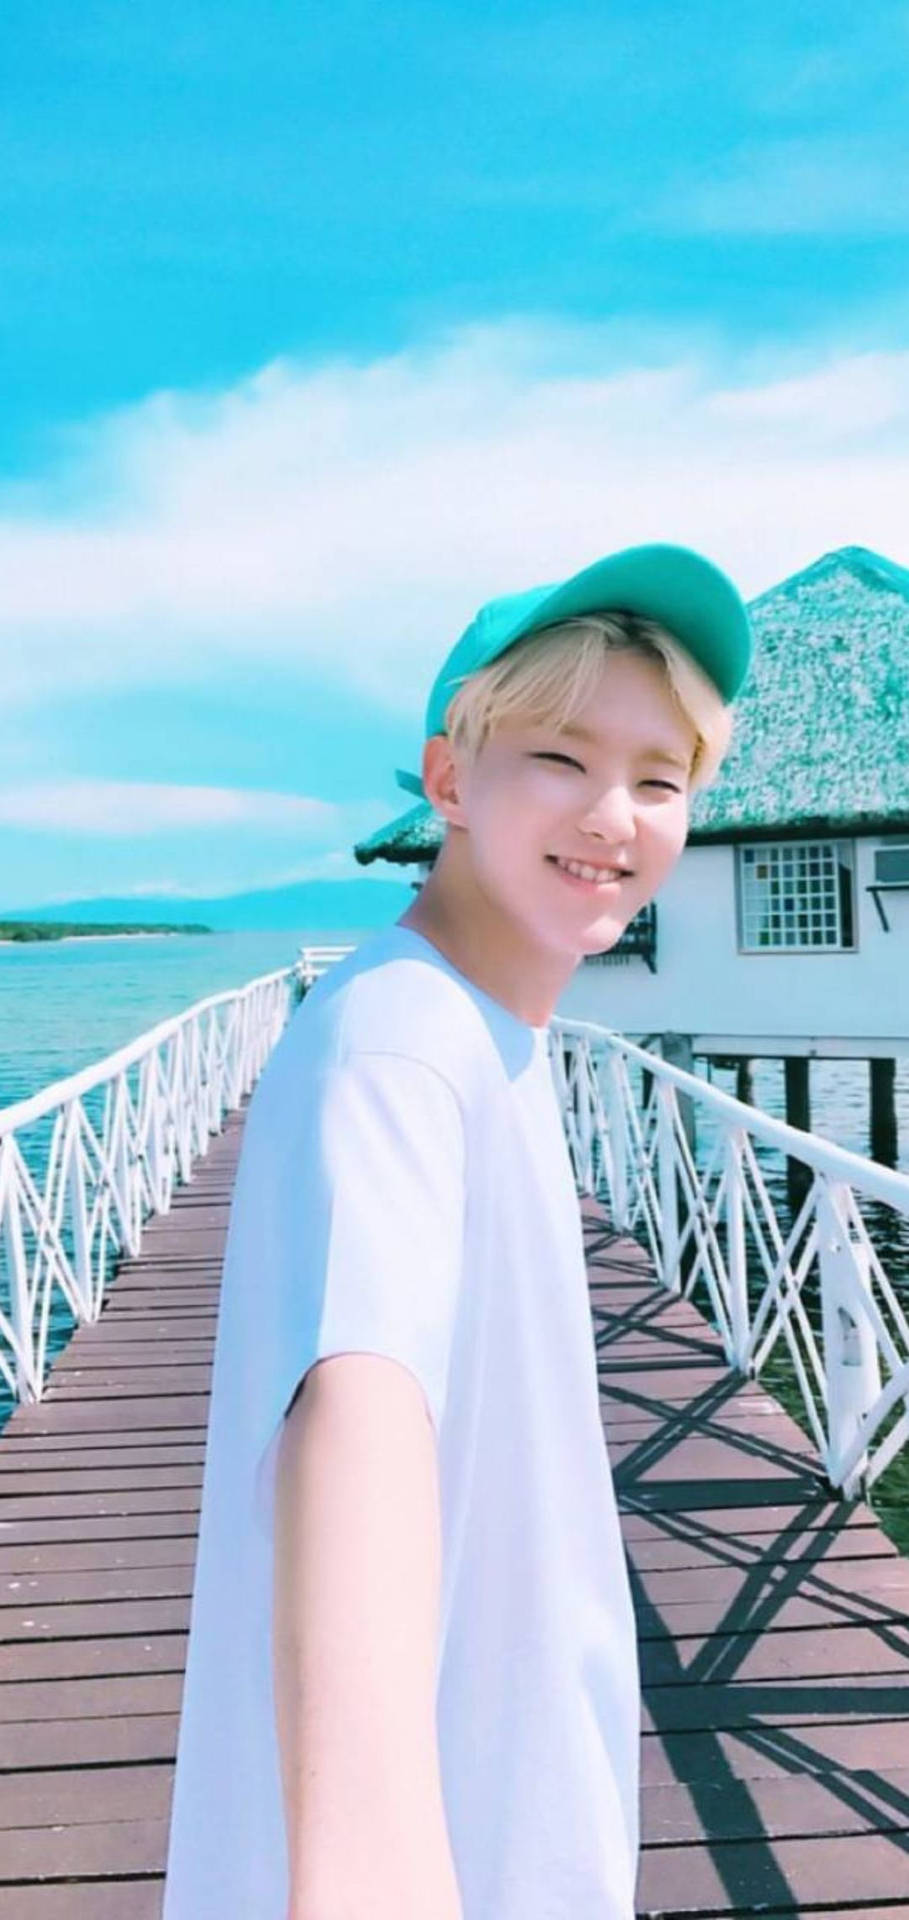 Hoshi In The Sea Background